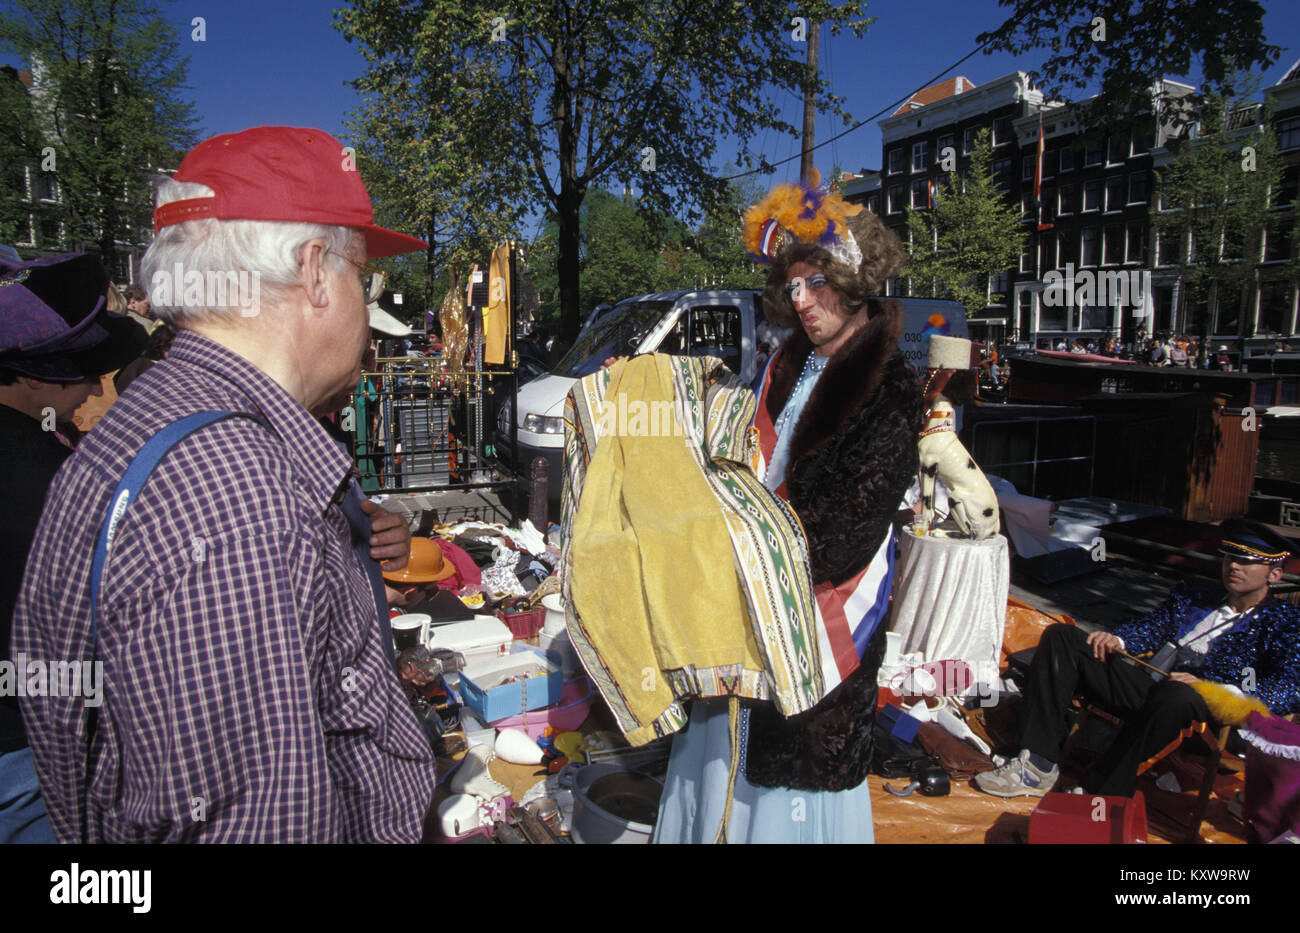 The Netherlands. Amsterdam. Annual festival on 27 april called Koningsdag (Kingsday), celebrating the king's birthday. Transvestite selling clothes to Stock Photo